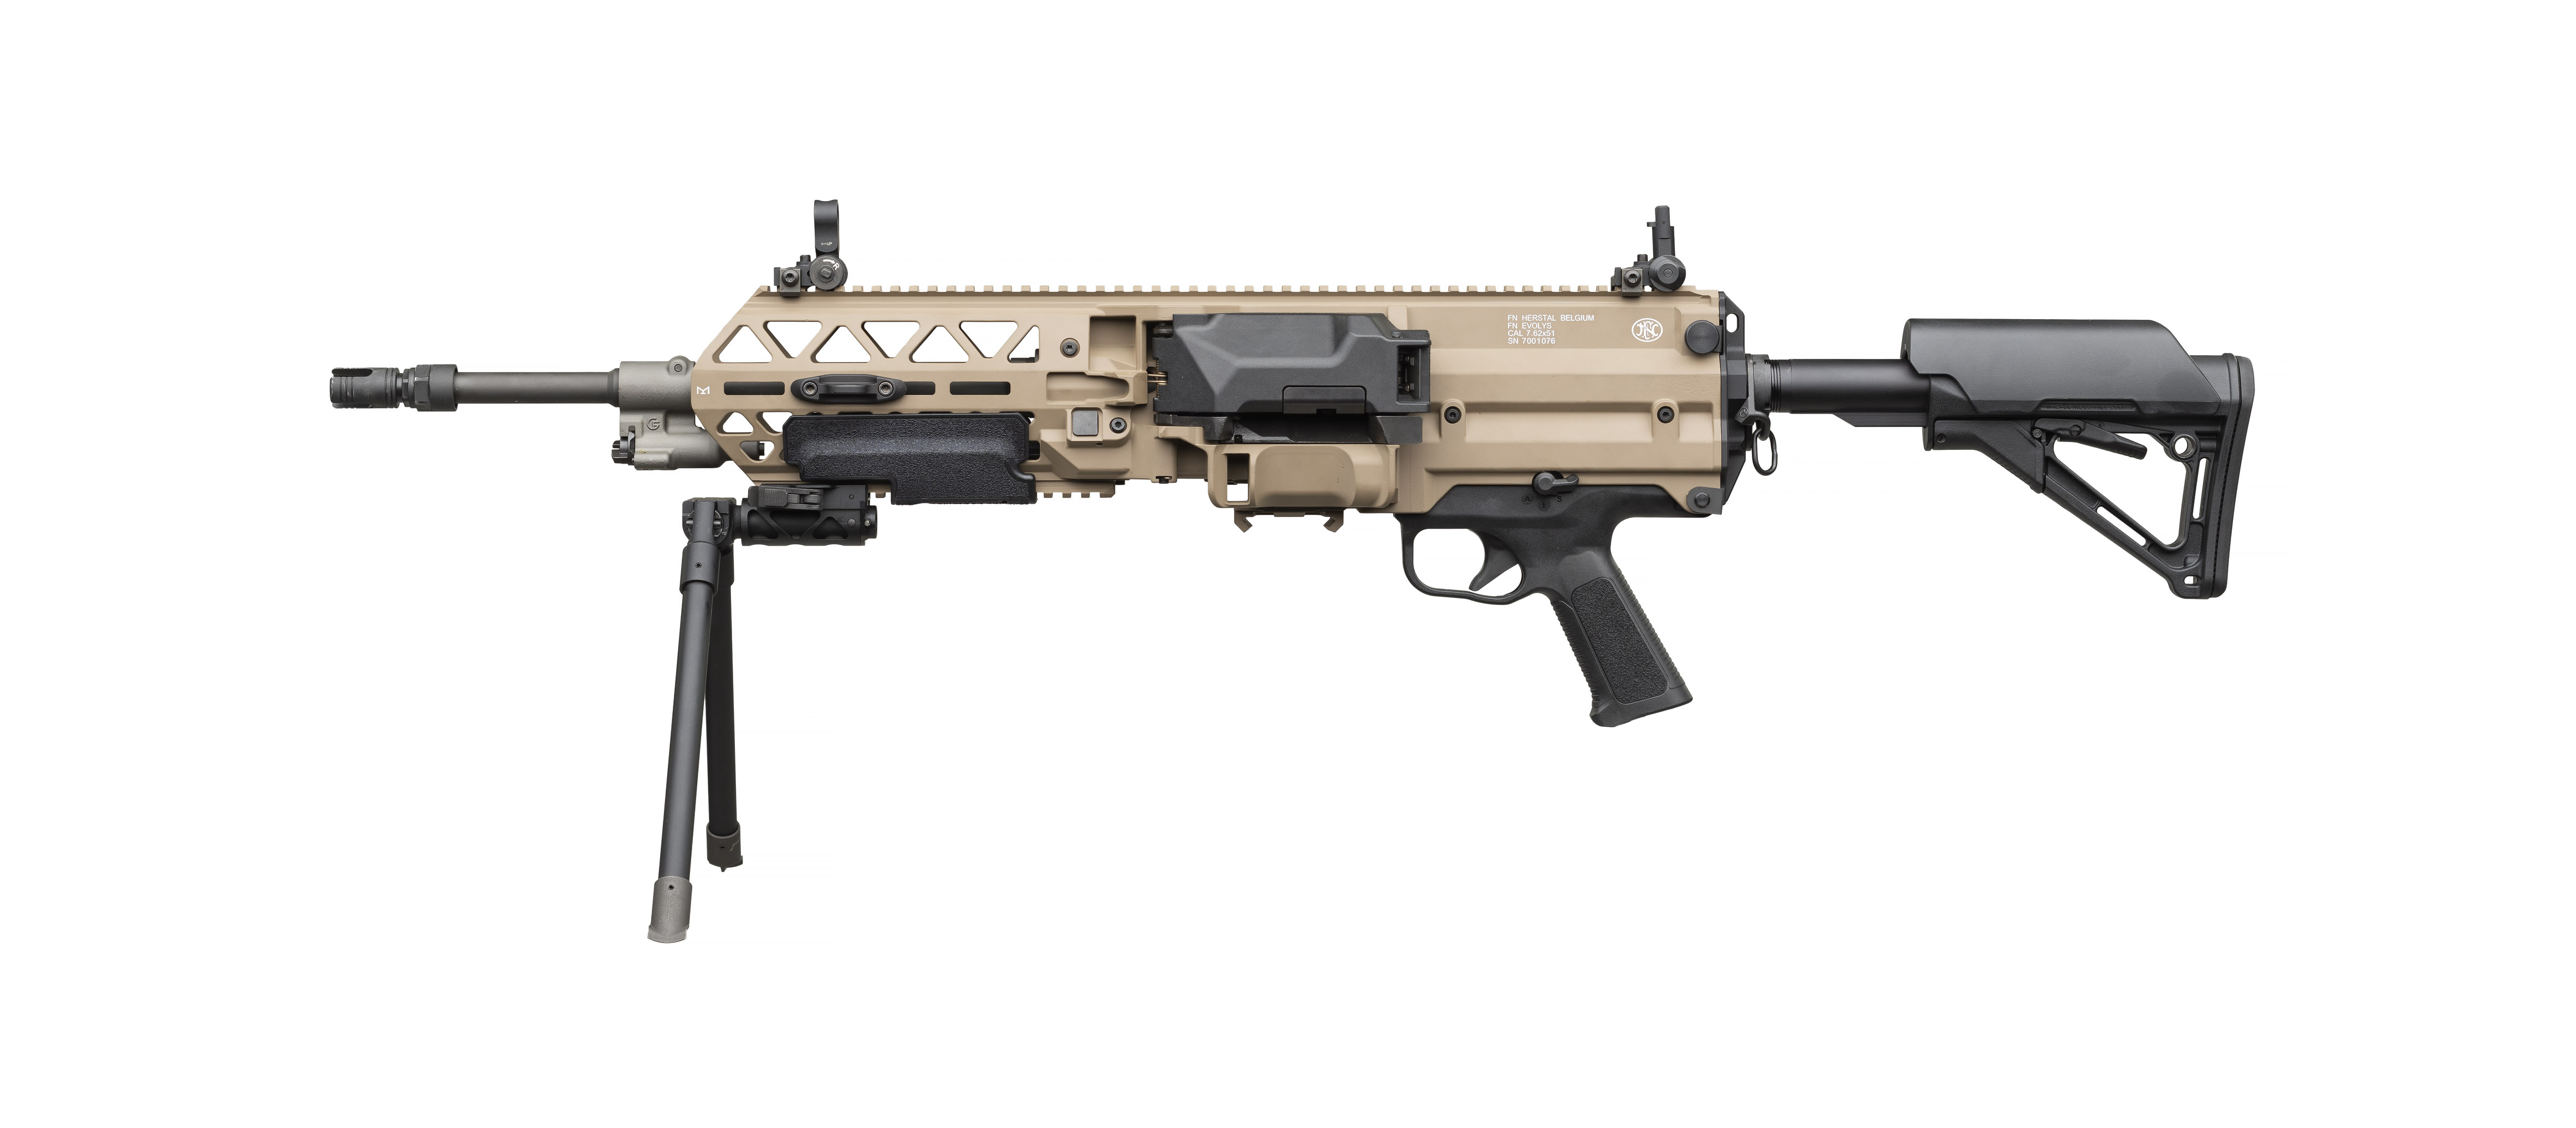 FN EVOLYS® 5.56 gets ergonomic changes based on user suggestions